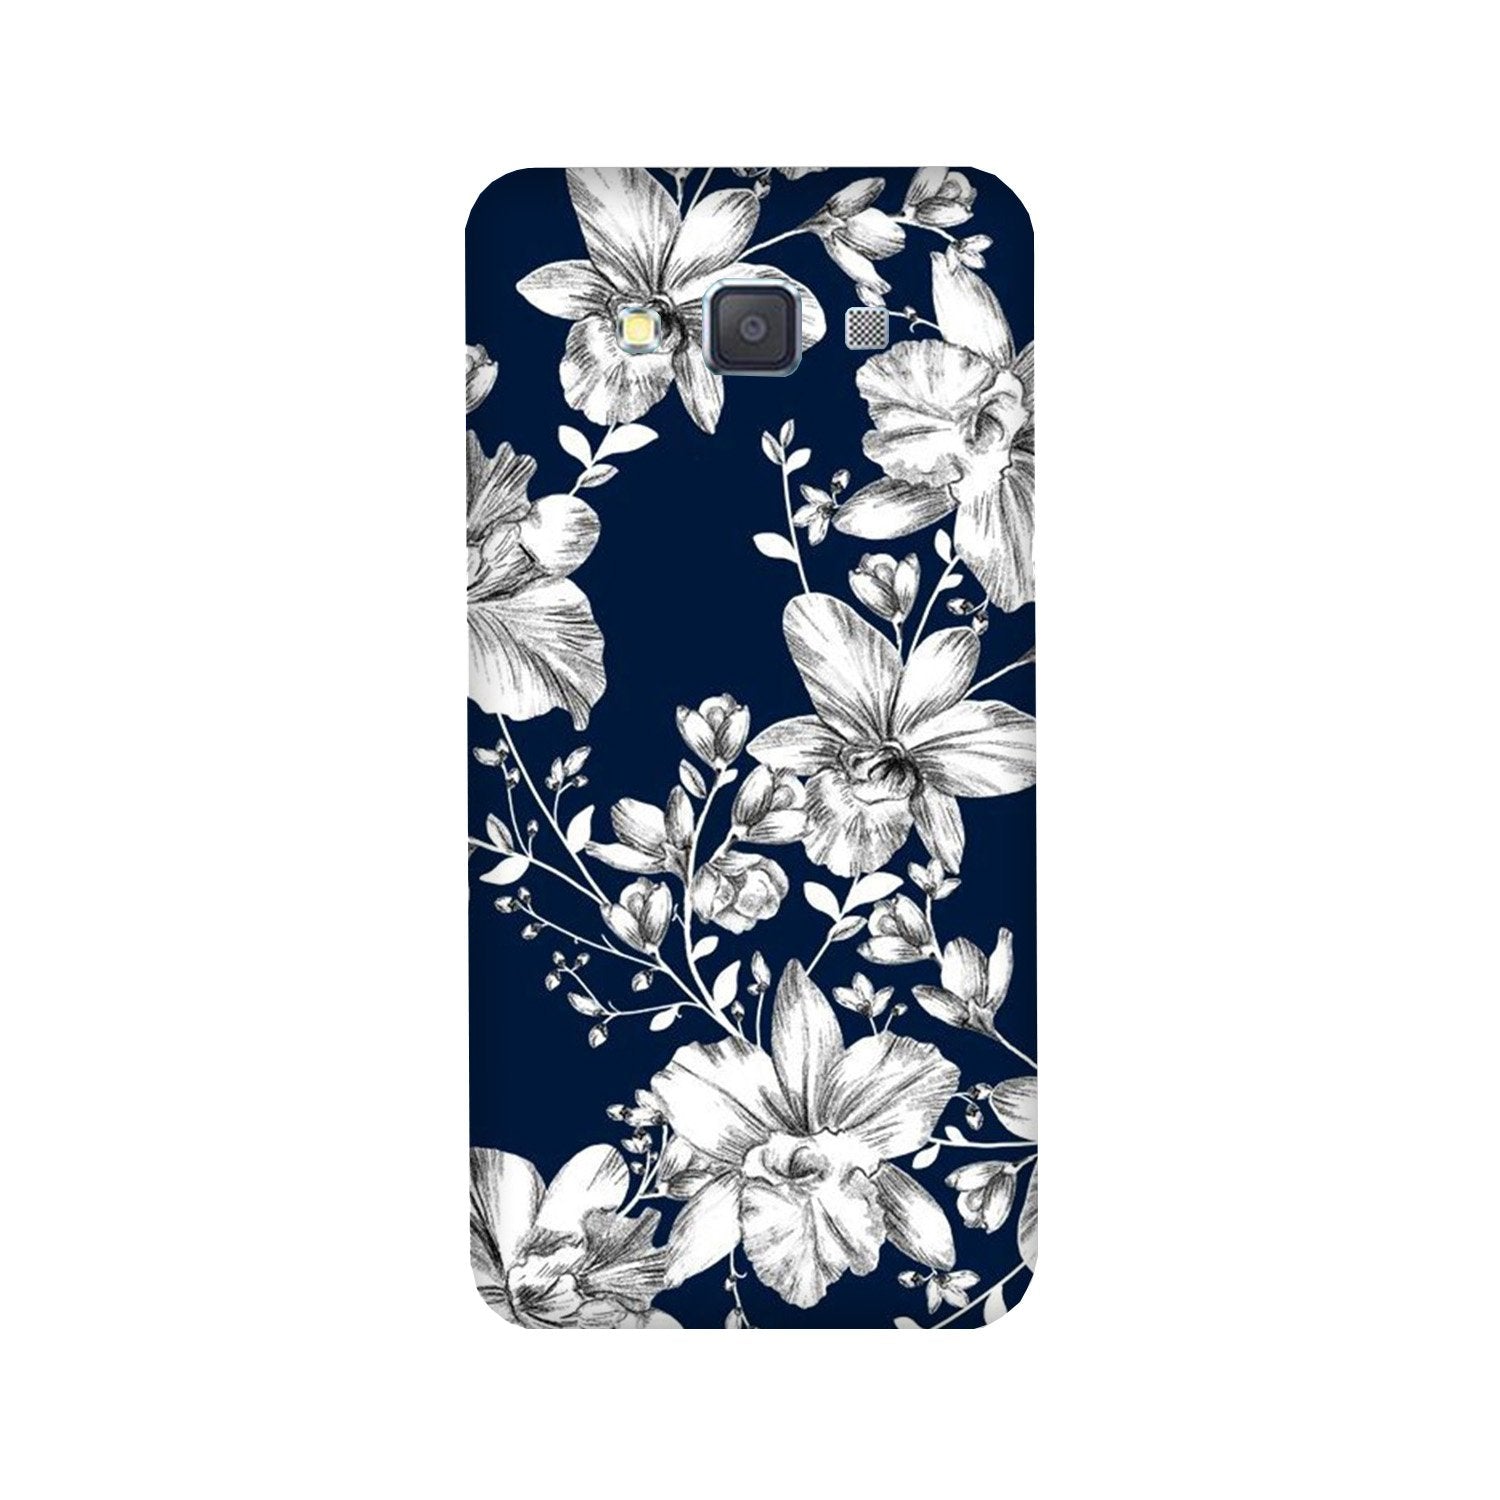 White flowers Blue Background Case for Galaxy Grand Max